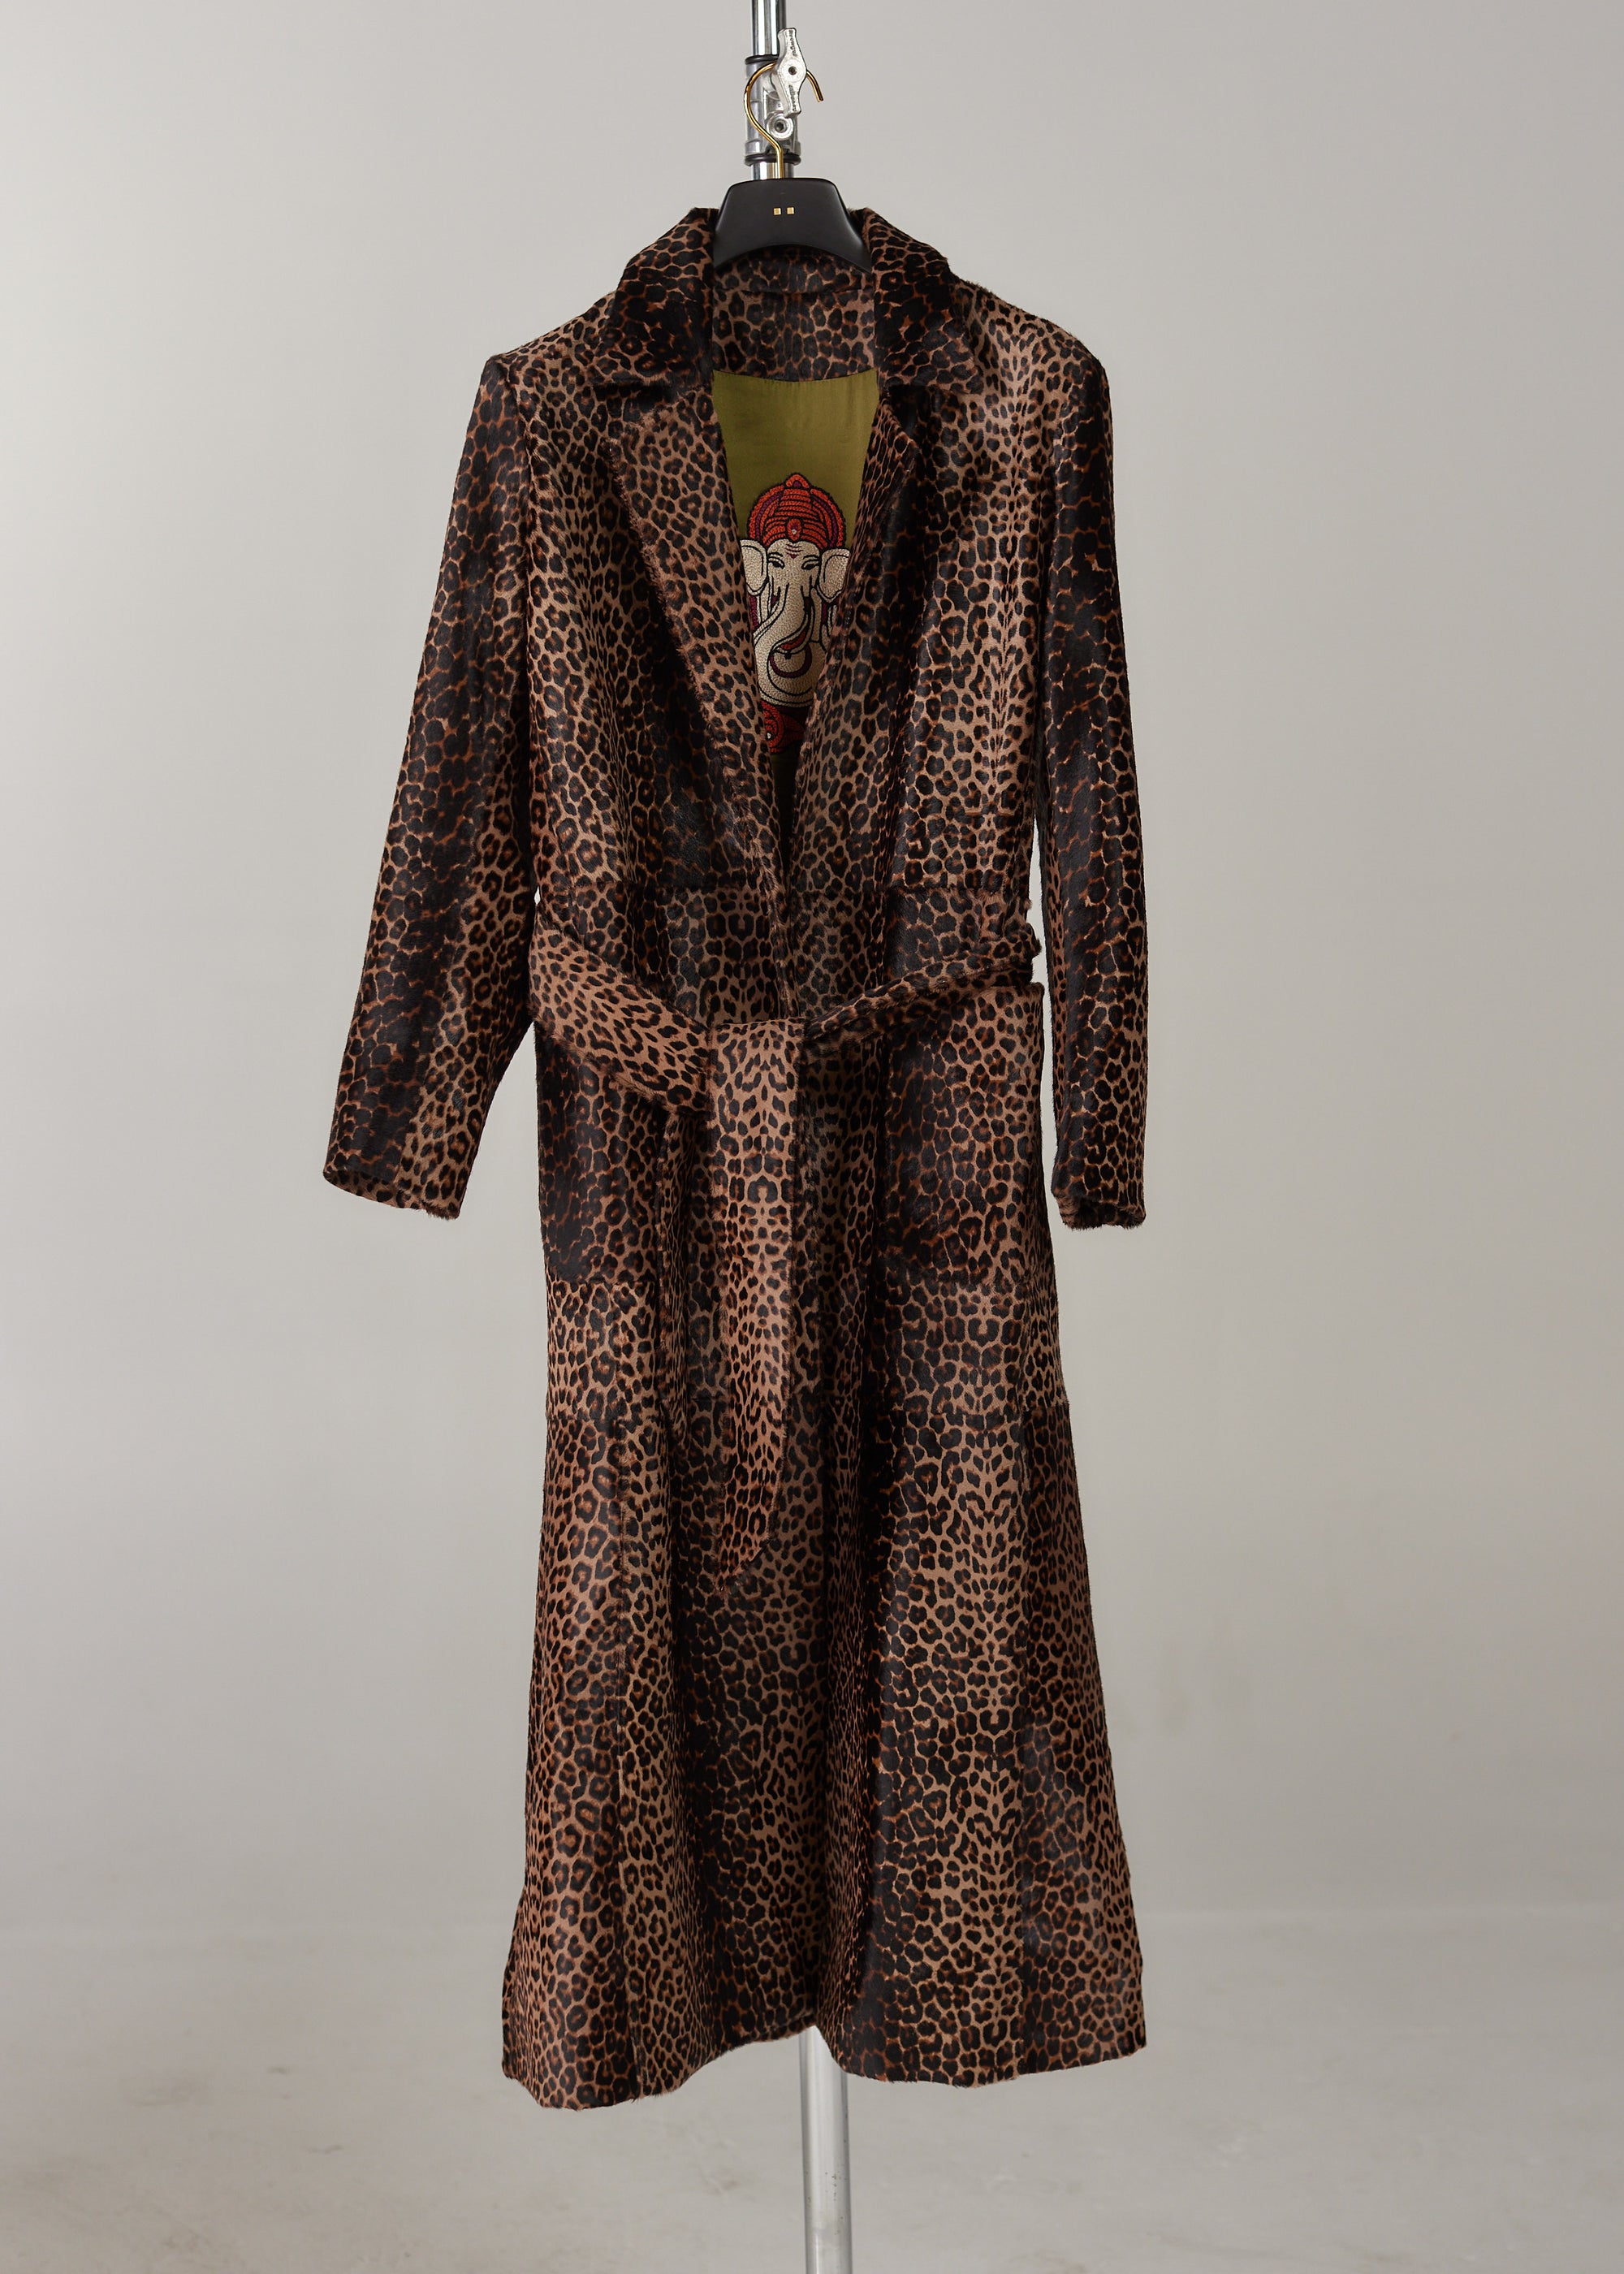 LNO Womens Cheetah Duster Size 8 - SOLD